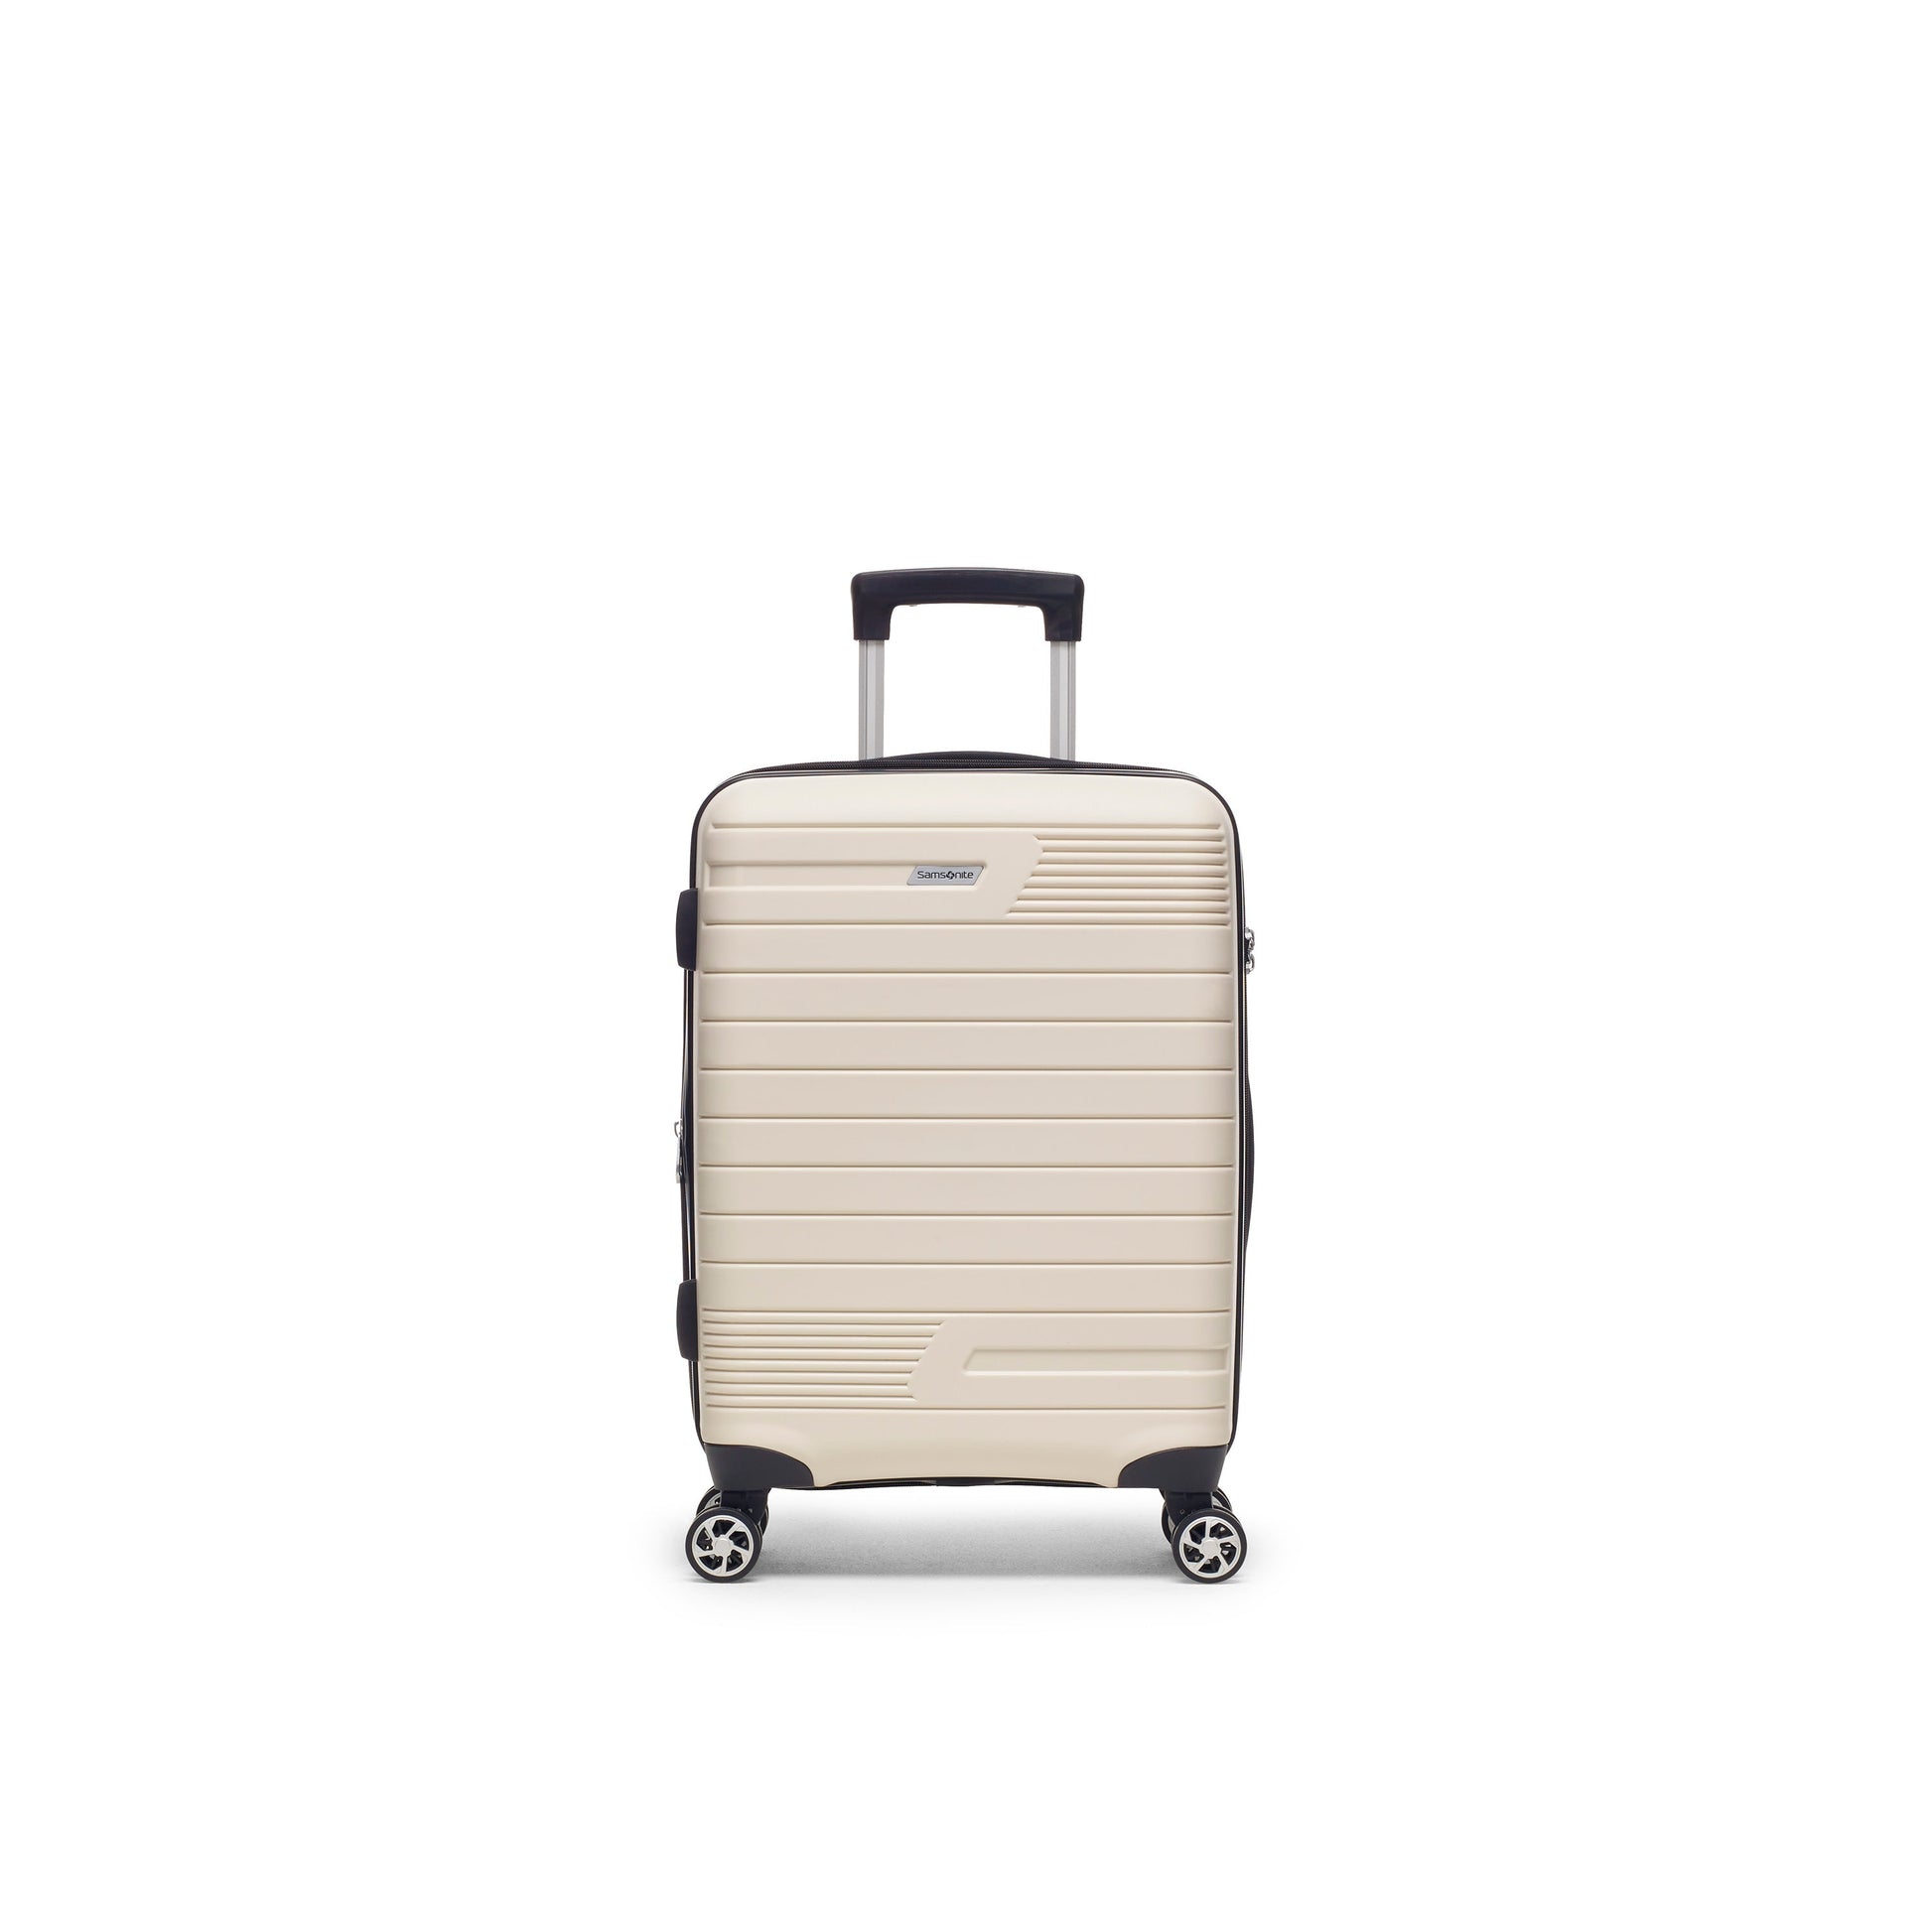 Samsonite Sirocco Collection Spinner Carry-On Expandable Luggage - Beige